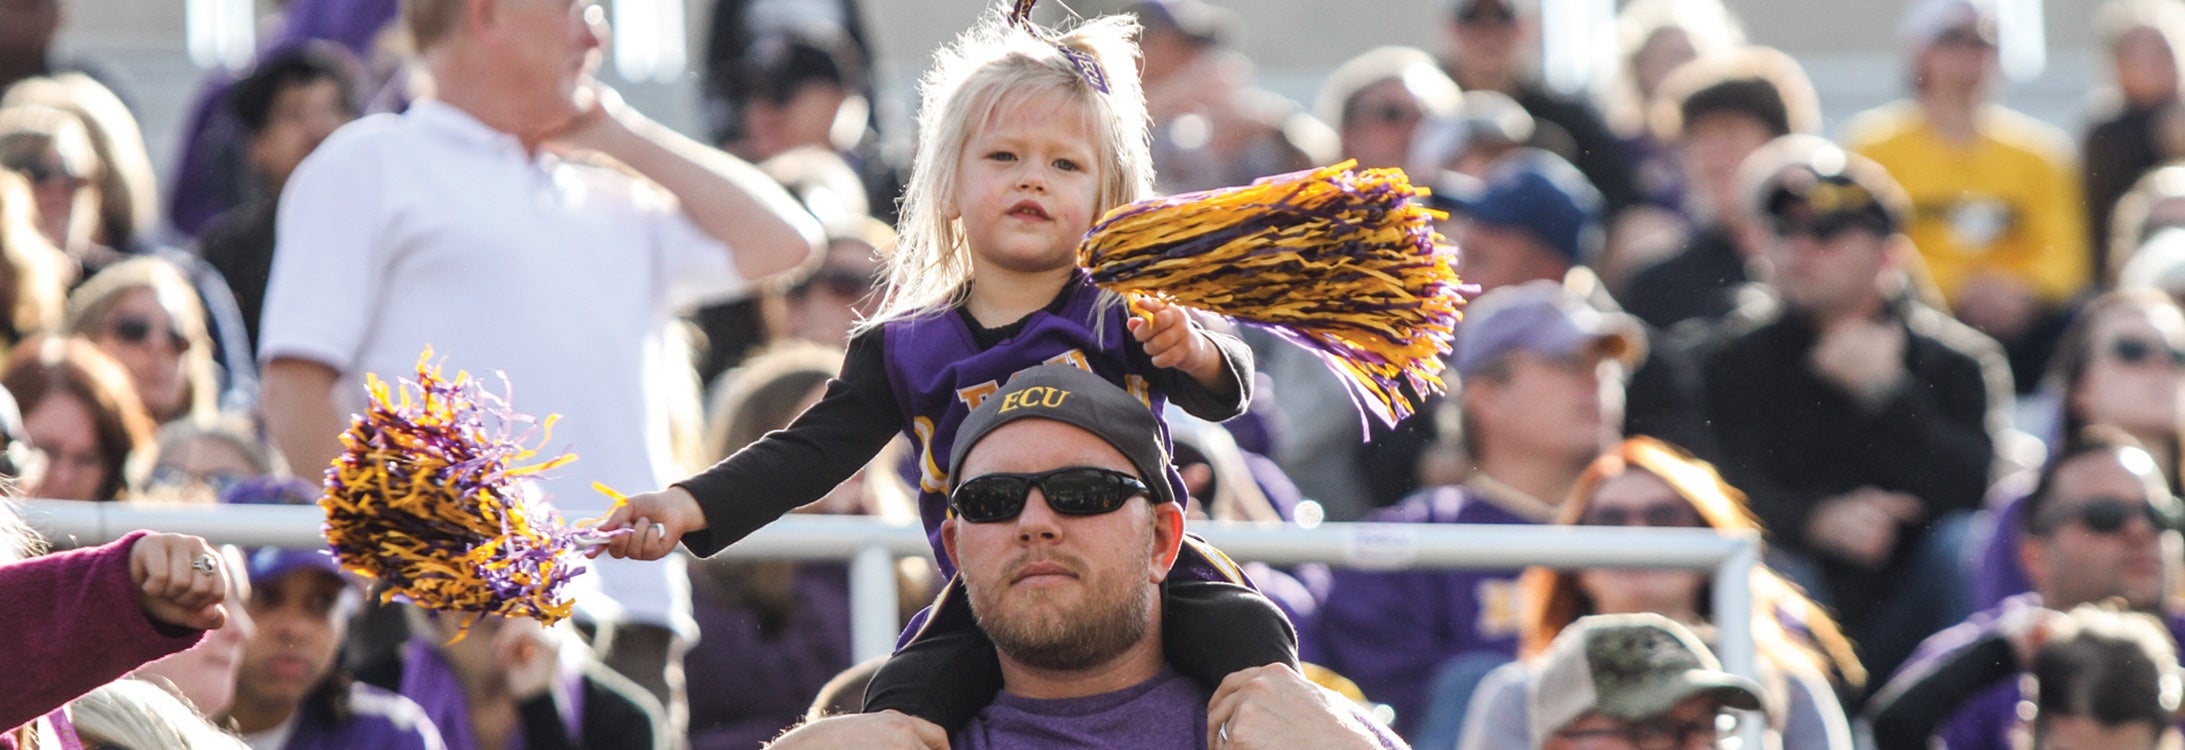 Fans dressed in ECU merchandise at a game.